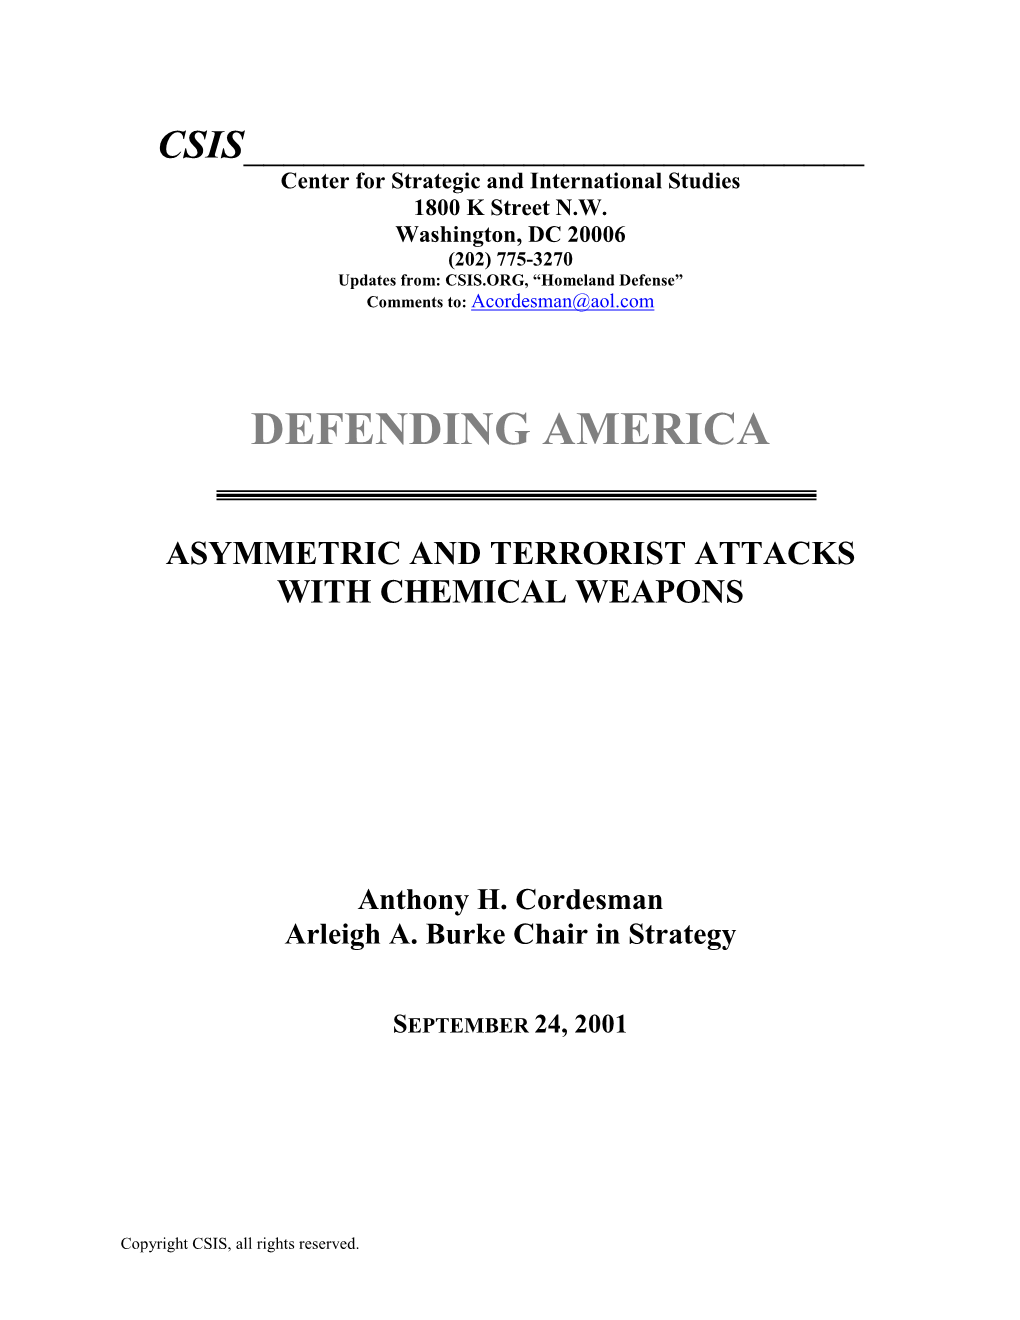 Asymmetric and Terrorist Attacks with Chemical Weapons